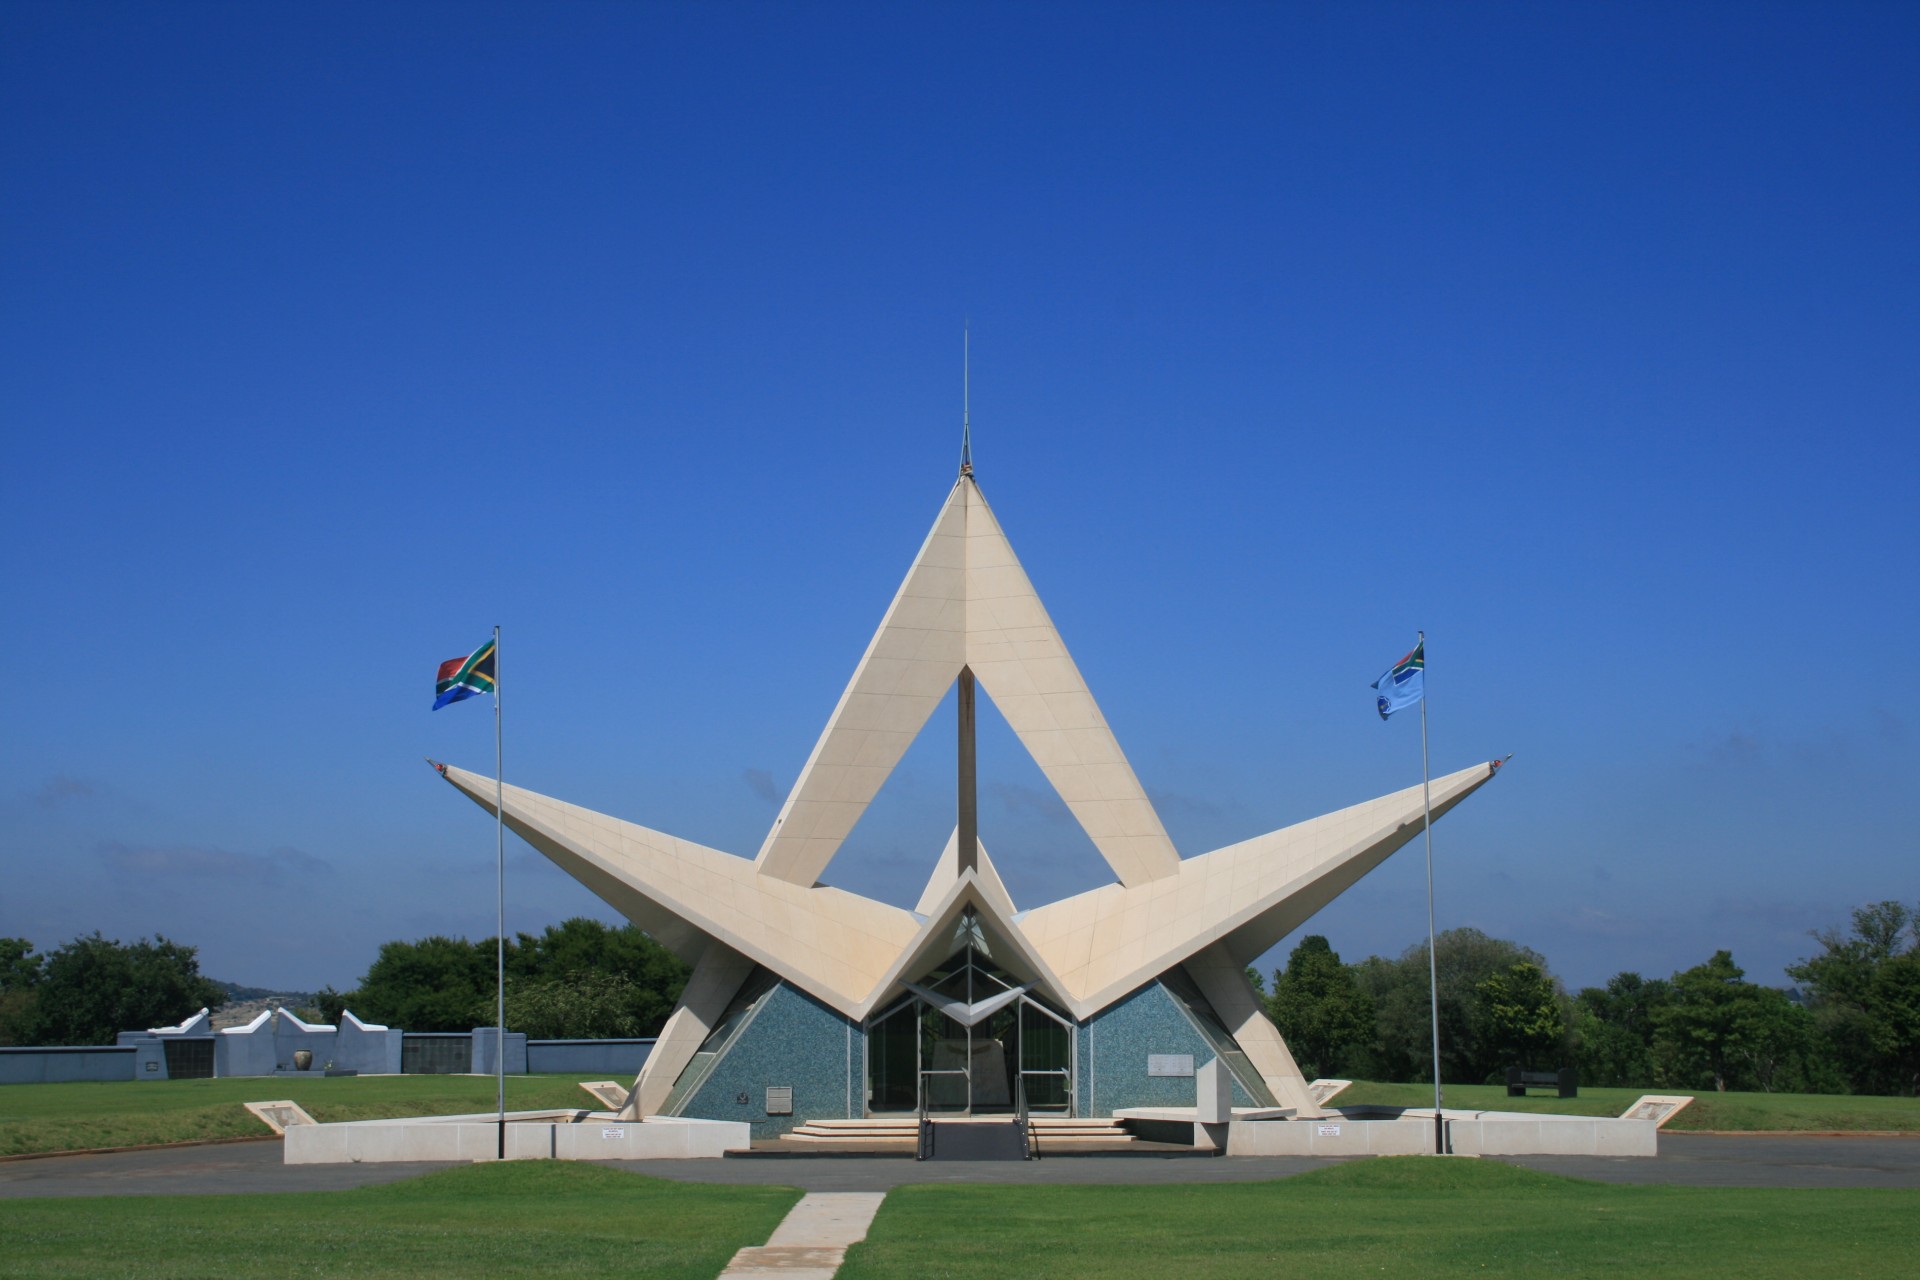 south african air force memorial monument star design free photo